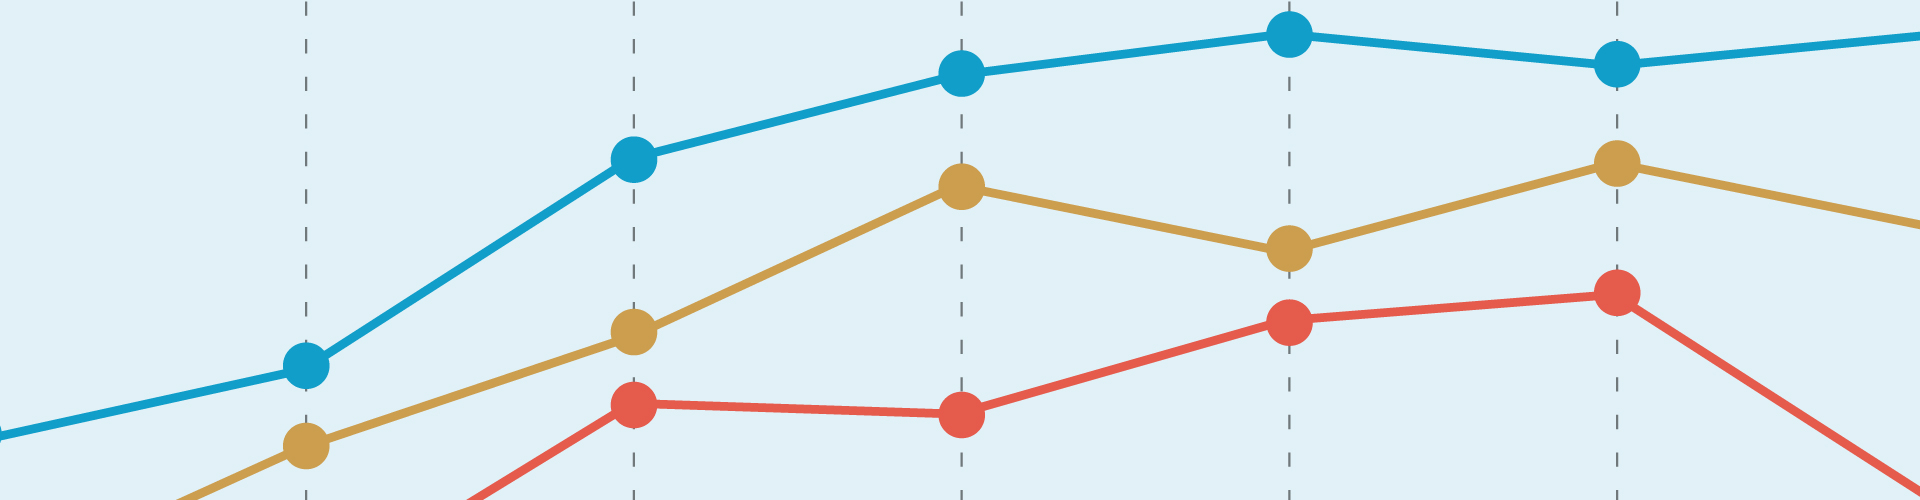 A line graph showing three trends on an upwards trajectory.